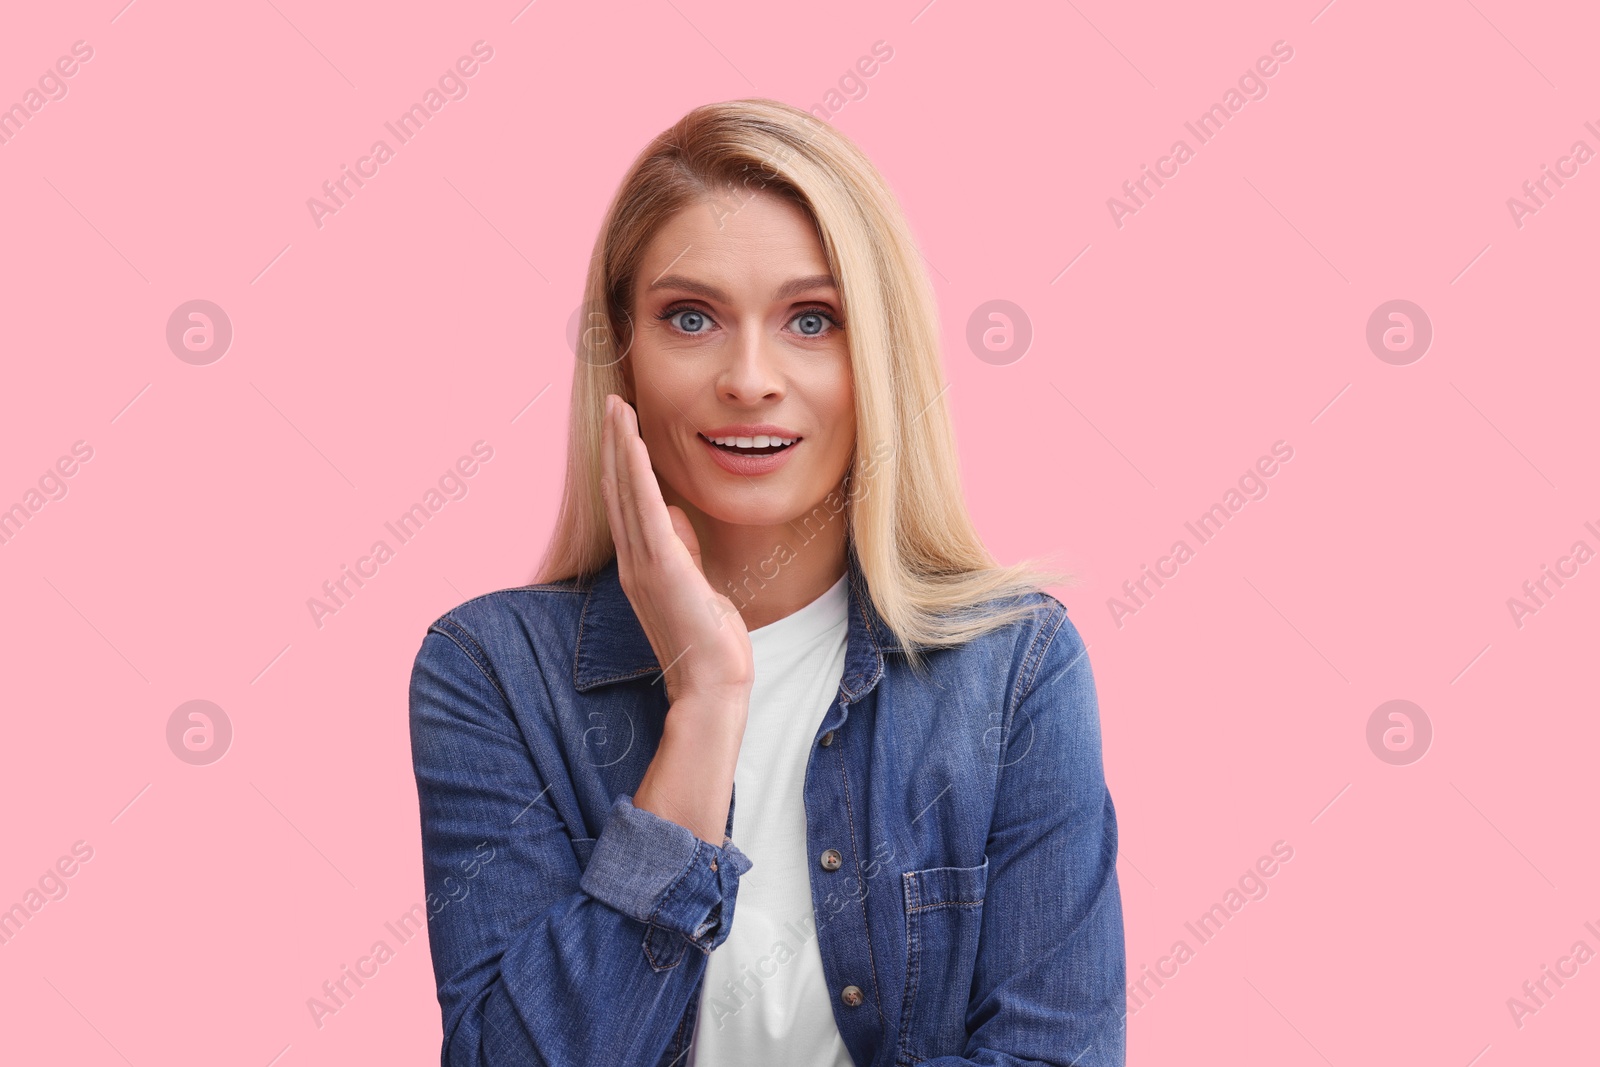 Photo of Portrait of surprised middle aged woman with blonde hair on pink background